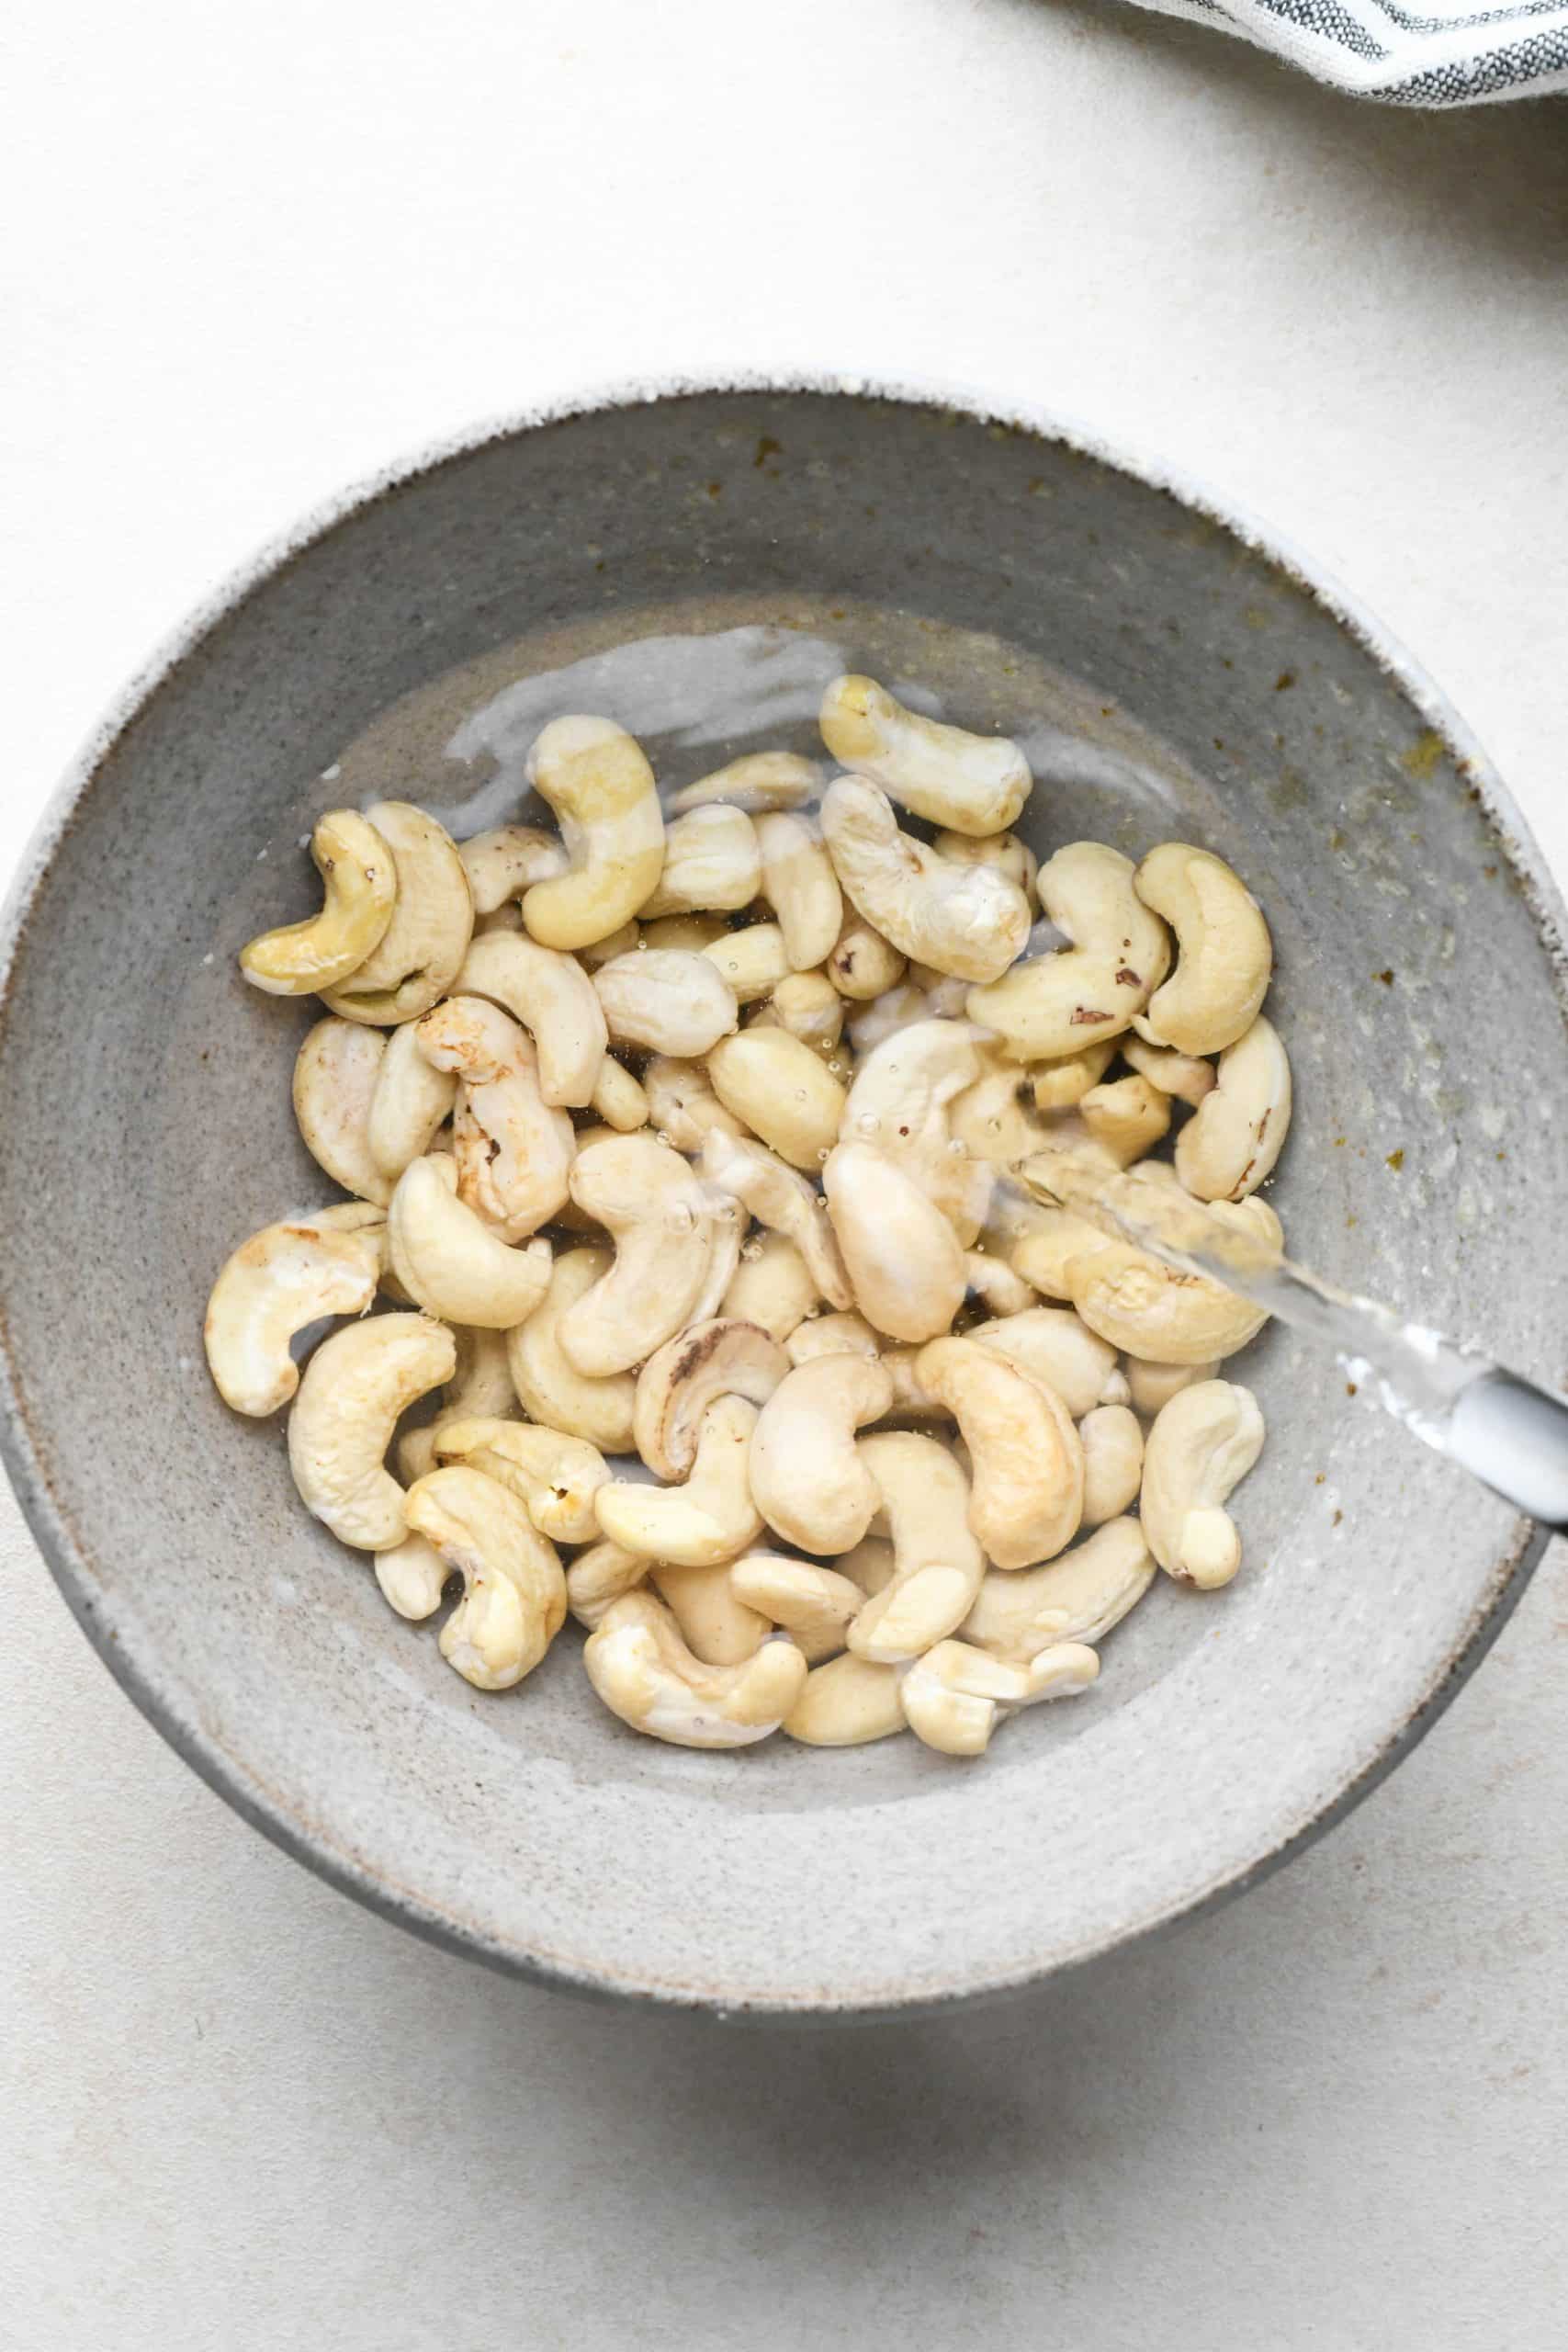 How to make buffalo chicken pasta: Pouring hot water over raw cashews in a small bowl to soak. 